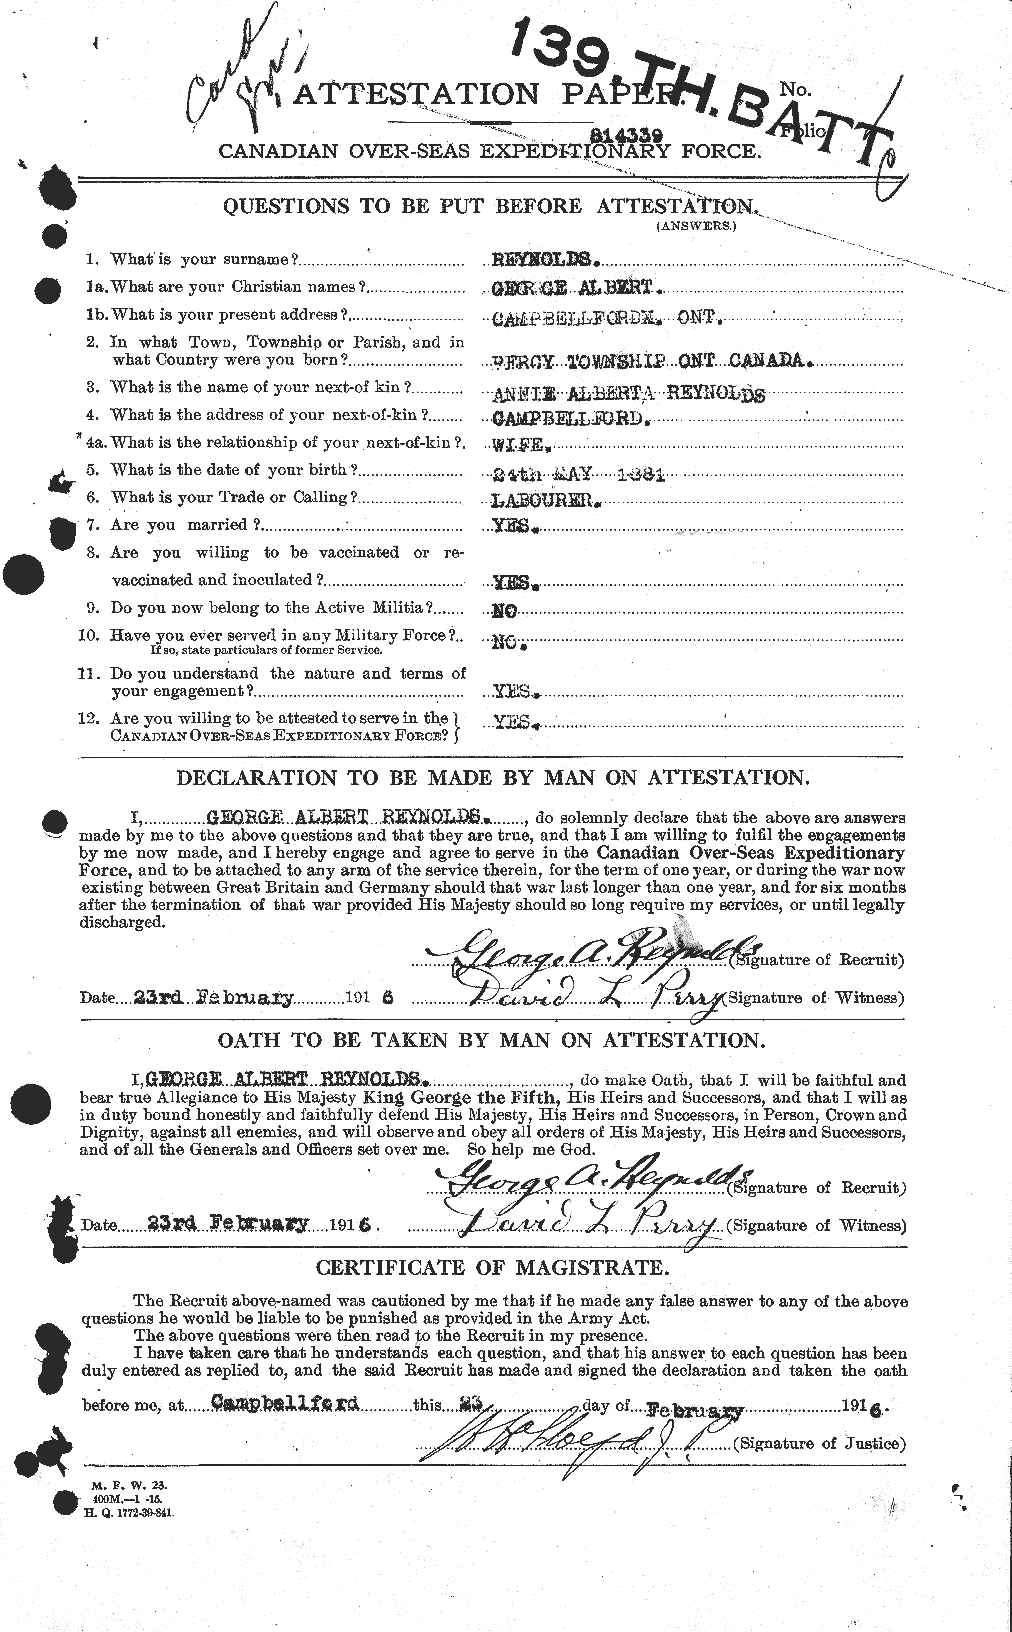 Personnel Records of the First World War - CEF 599210a